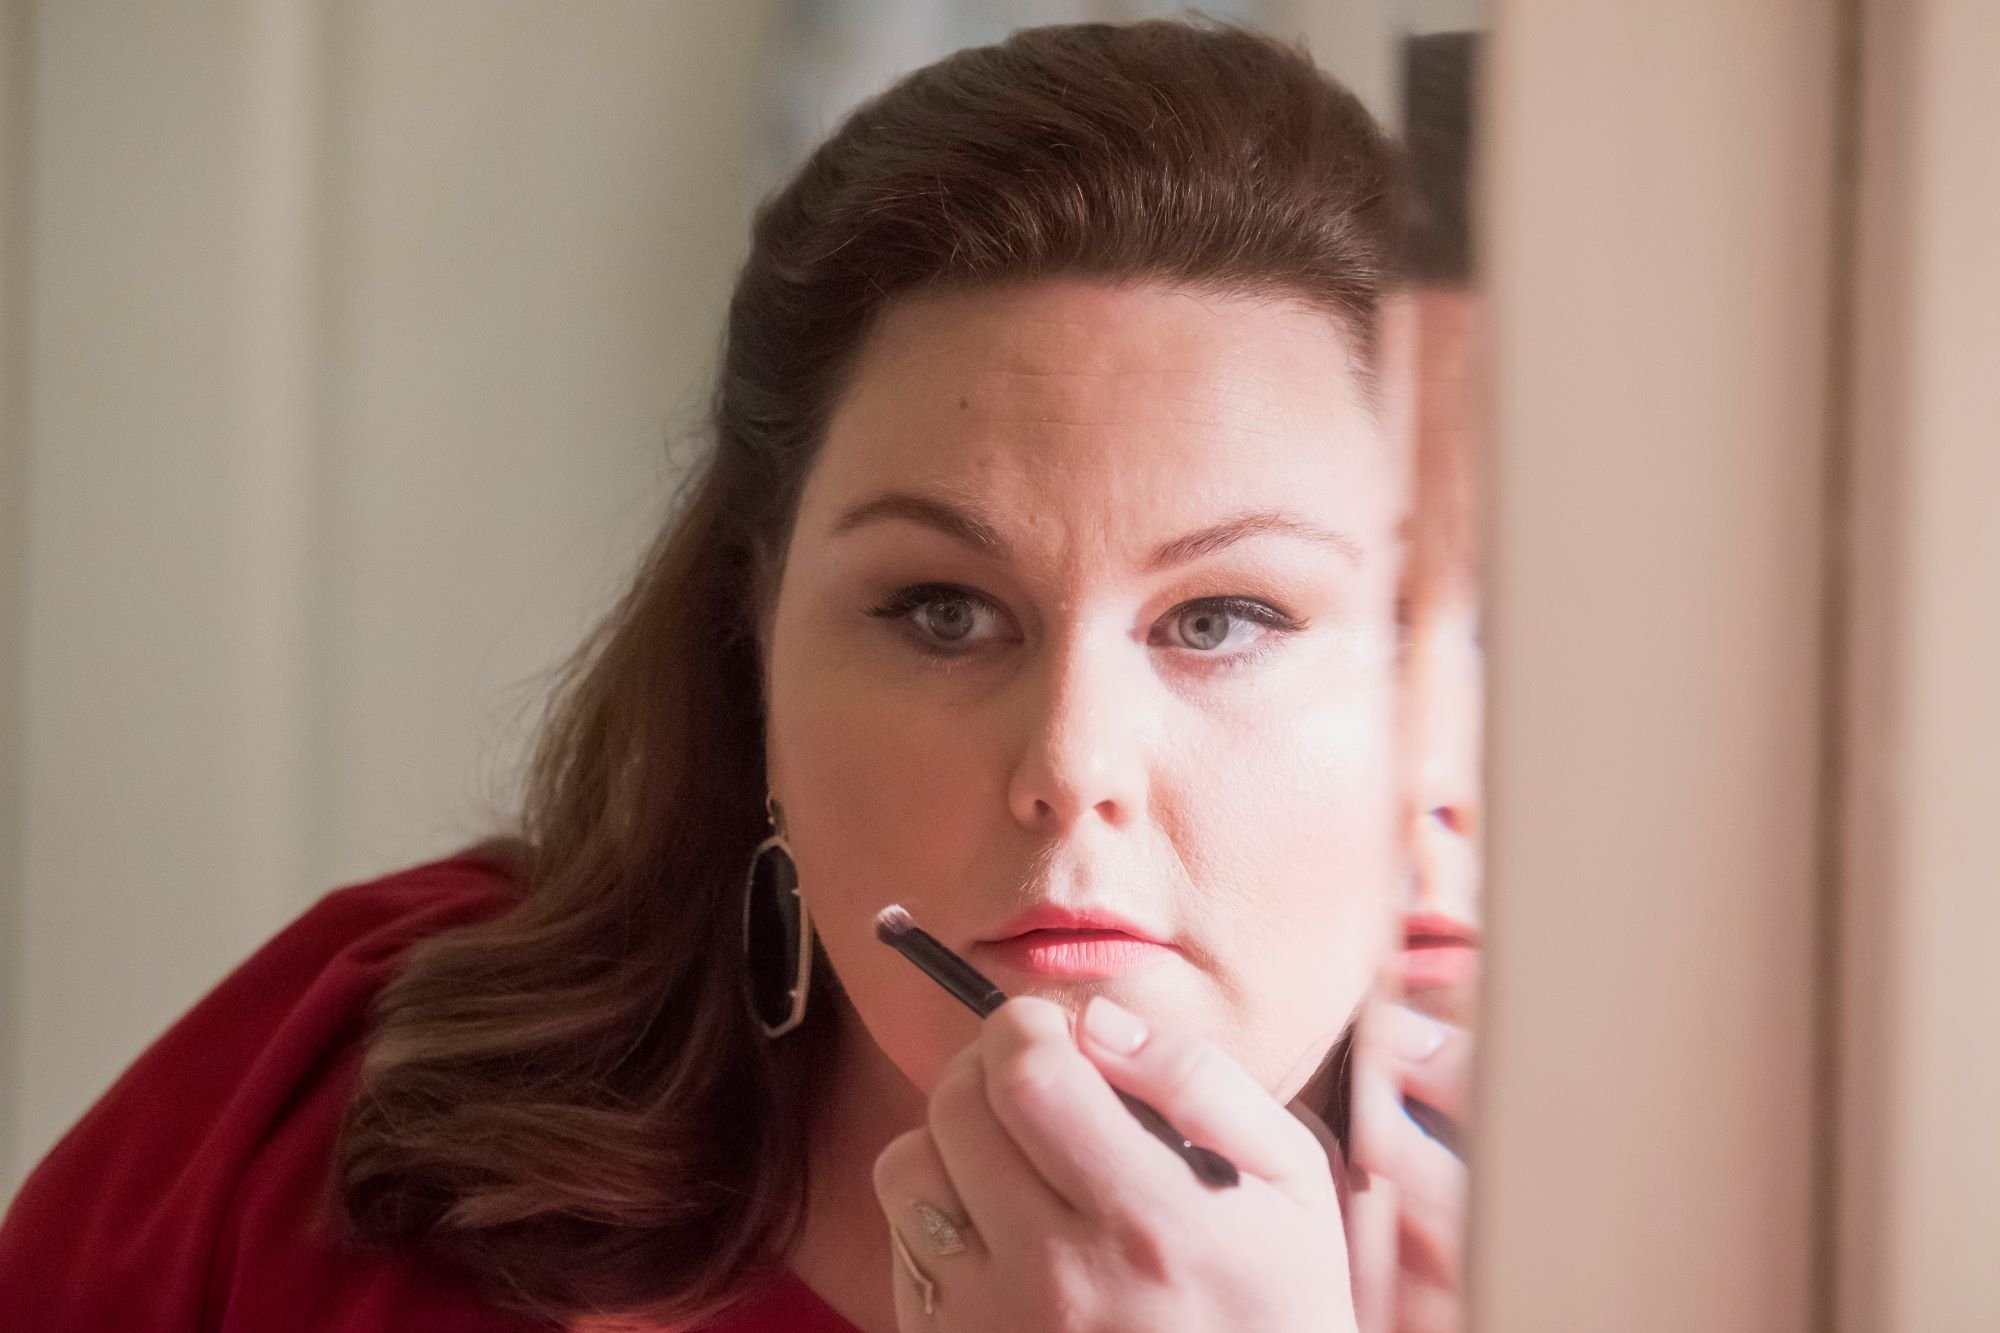 ‘This Is Us’ Season 6: Chrissy Metz Hints at a New Trilogy of Episodes Focusing on the Big Three